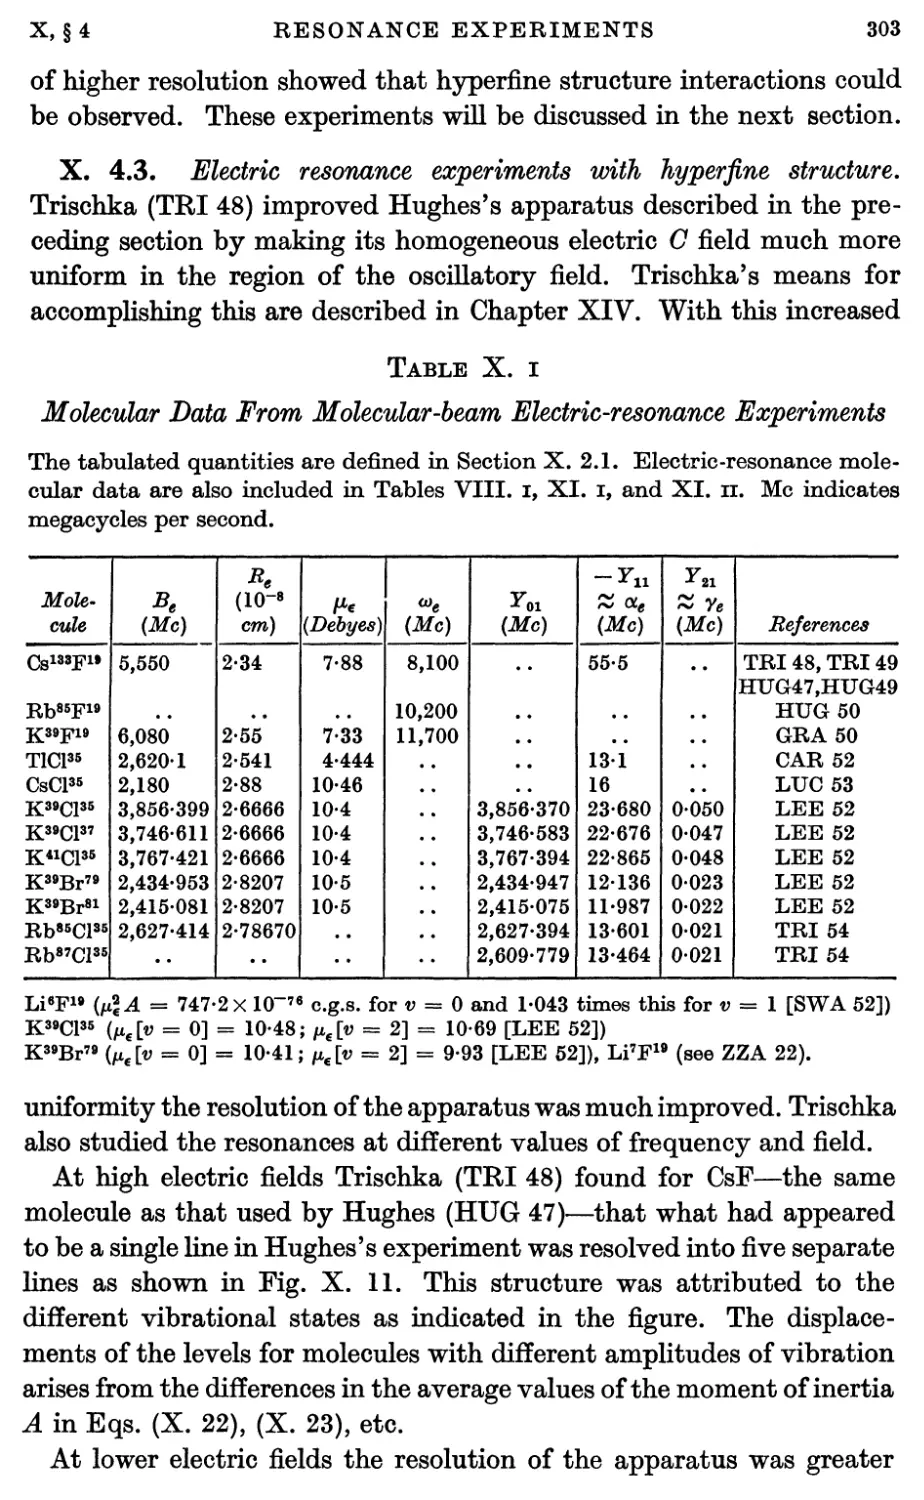 X.4.3. Electric resonance experiments with hyperfine structure